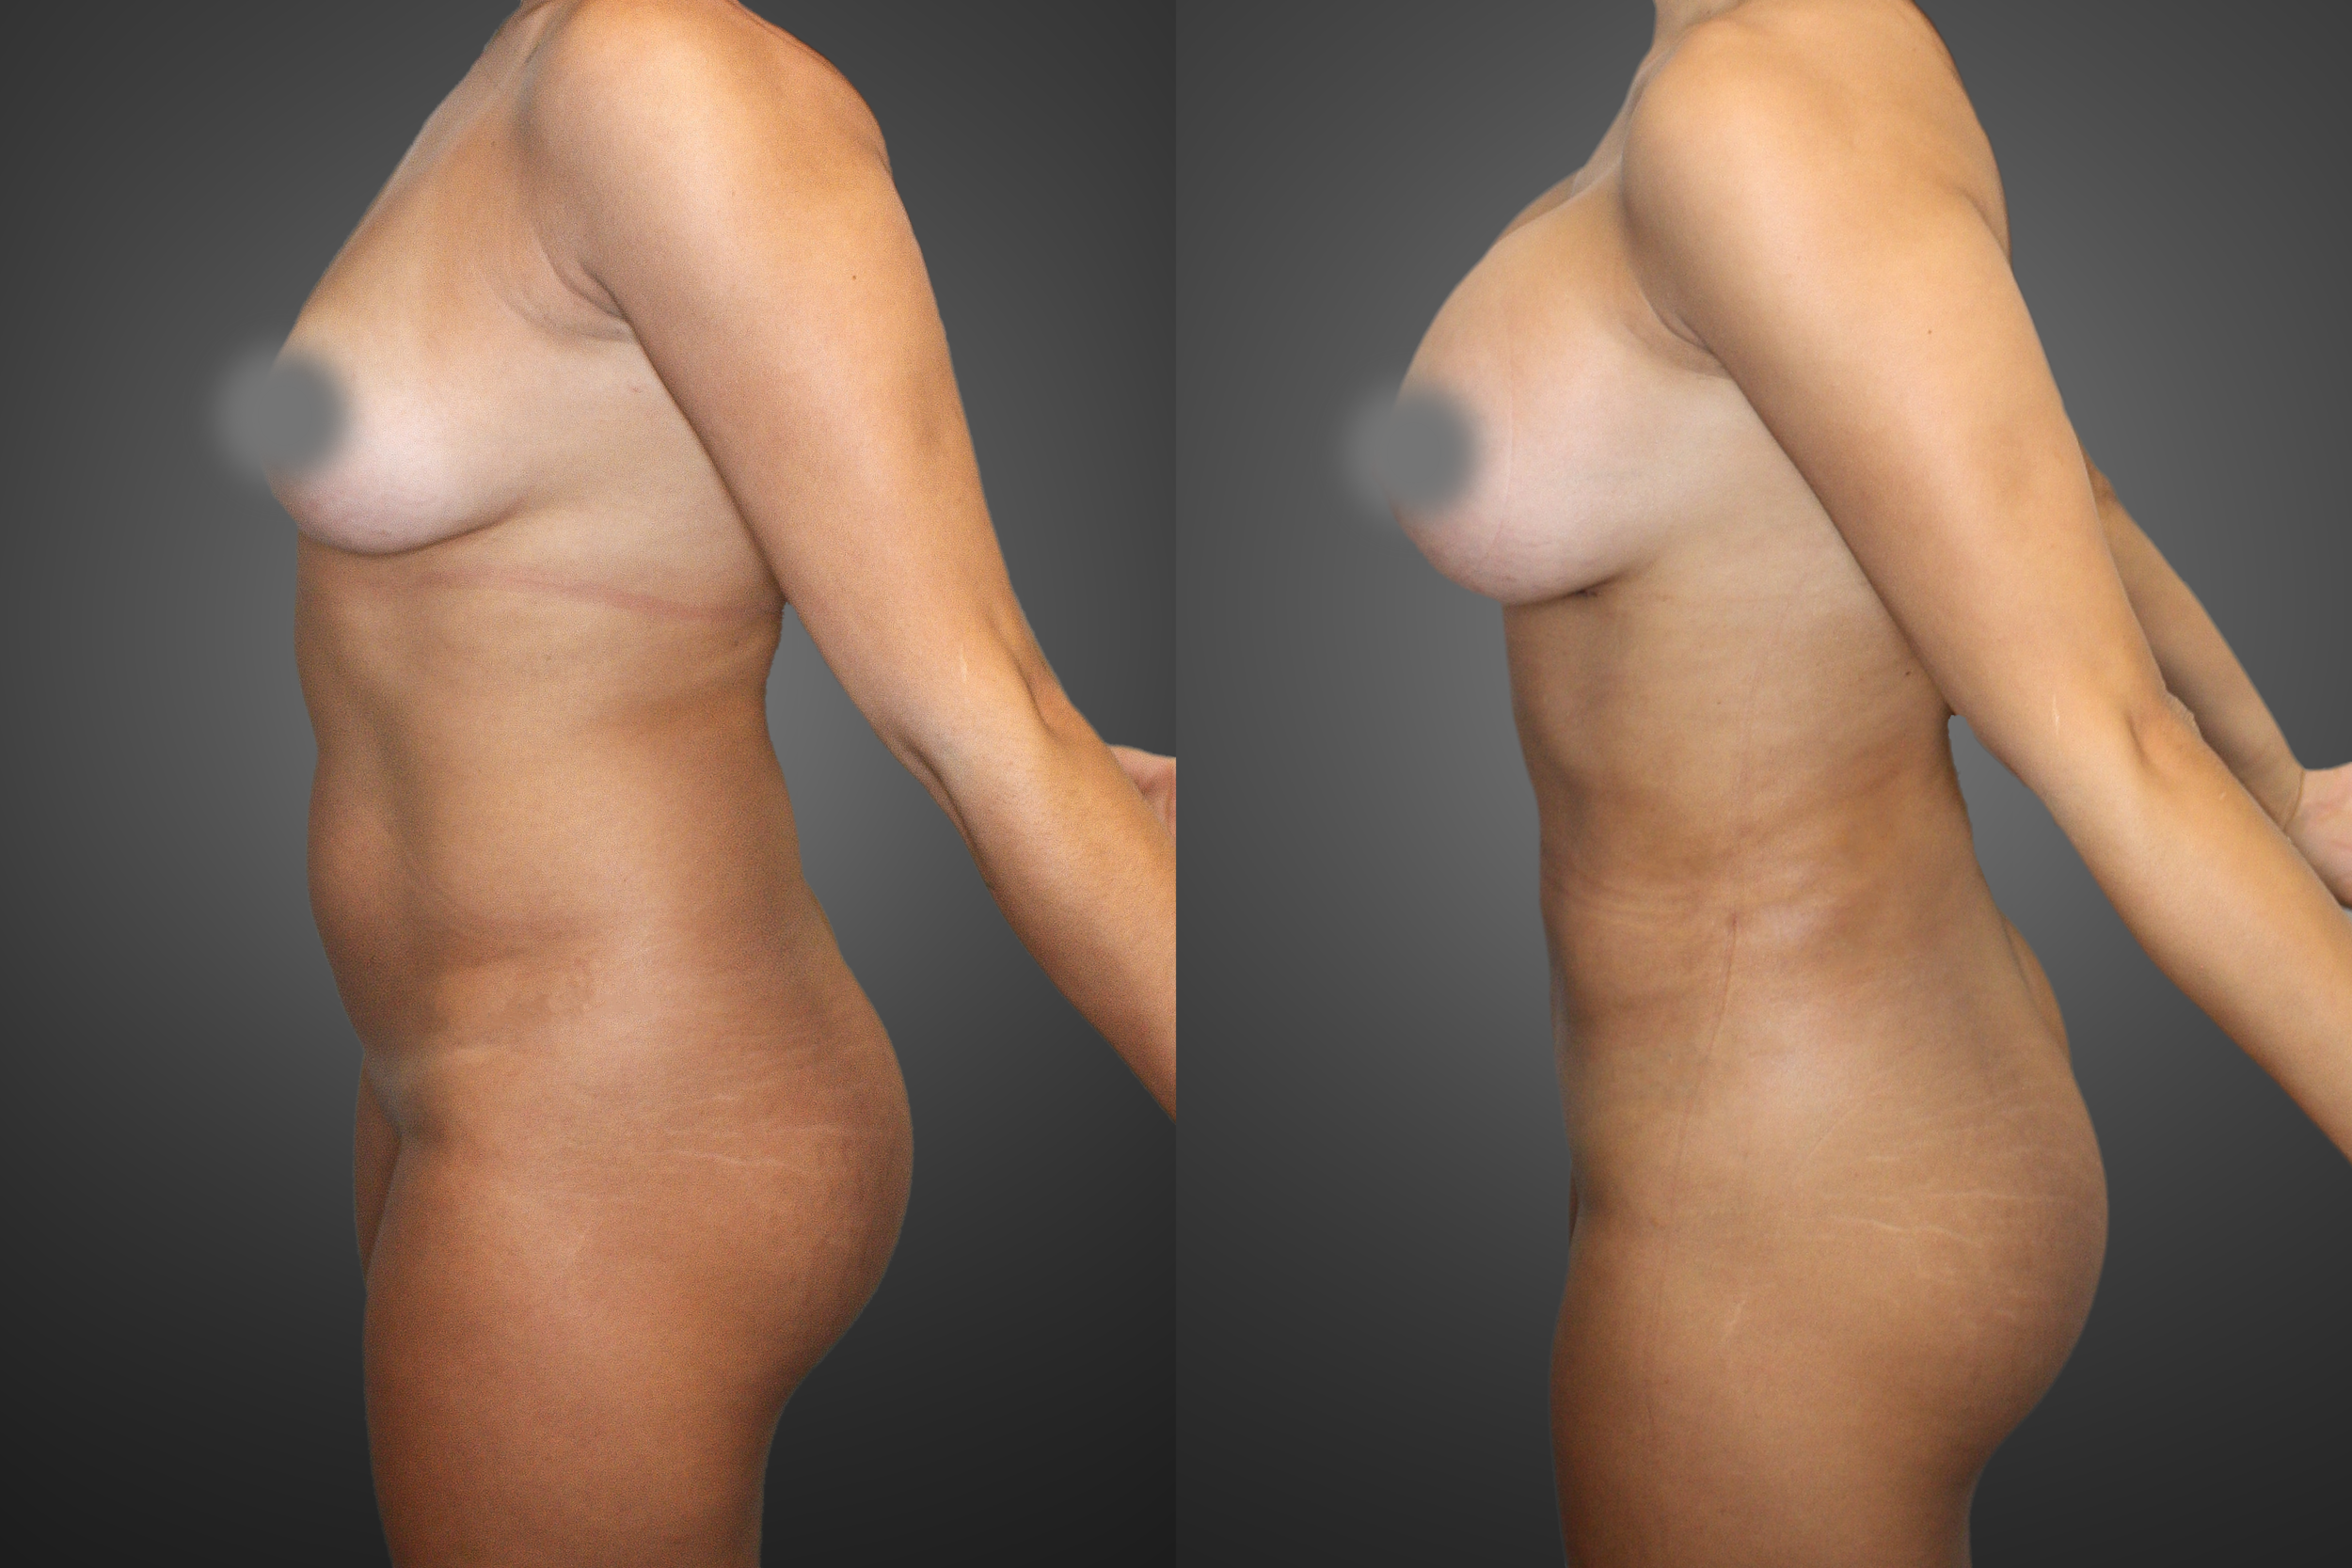 Breast augmentation and Liposuction